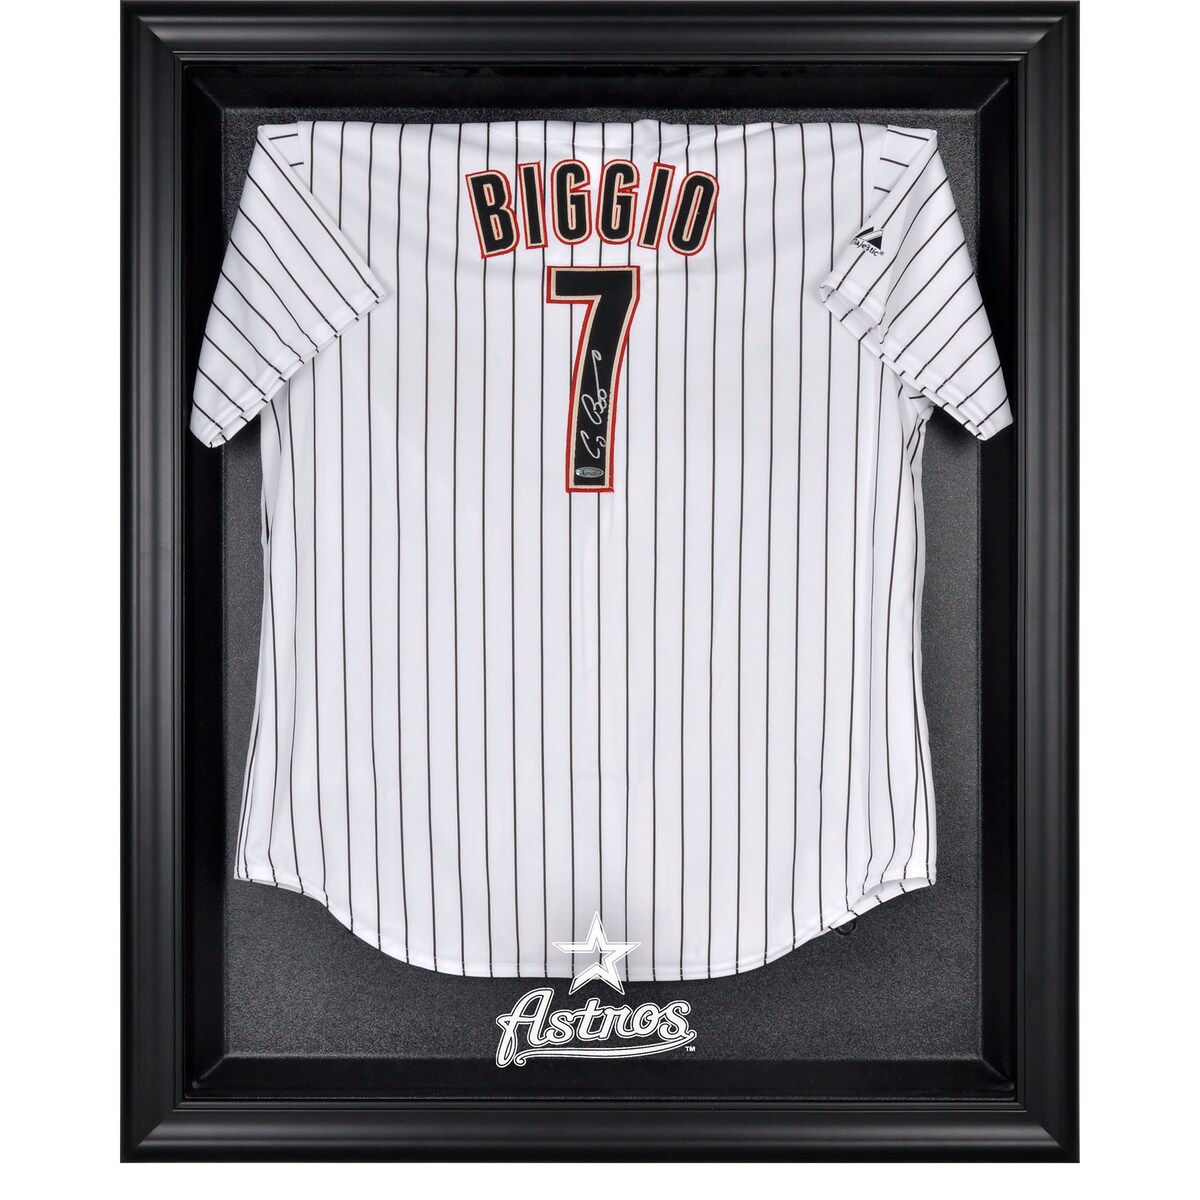 The Houston Astros black framed logo jersey display case opens on hinges and is easily wall-mounted. It comes with a 24" clear acrylic rod to display a collectible jersey. This case is constructed with a durable, high-strength injection mold backing, encased by a beautiful wood frame and features an engraved team logo on the front. Officially licensed by Major League Baseball. The inner dimensions of the case are 38" x 29 1/2"x 3" with the outer measurements of 42" x 34 1/2" x 3 1/2". Memorabilia sold separately.Wood frameEngraved team graphicsHas a LogoIncludes acrylic rod to hold jerseyBrand: Fanatics AuthenticImportedOfficially licensed MLB productEasily wall mountedMade in the U.S.A.Memorabilia sold separatelyOfficially licensedHinges to open easilyCollectible jersey display case